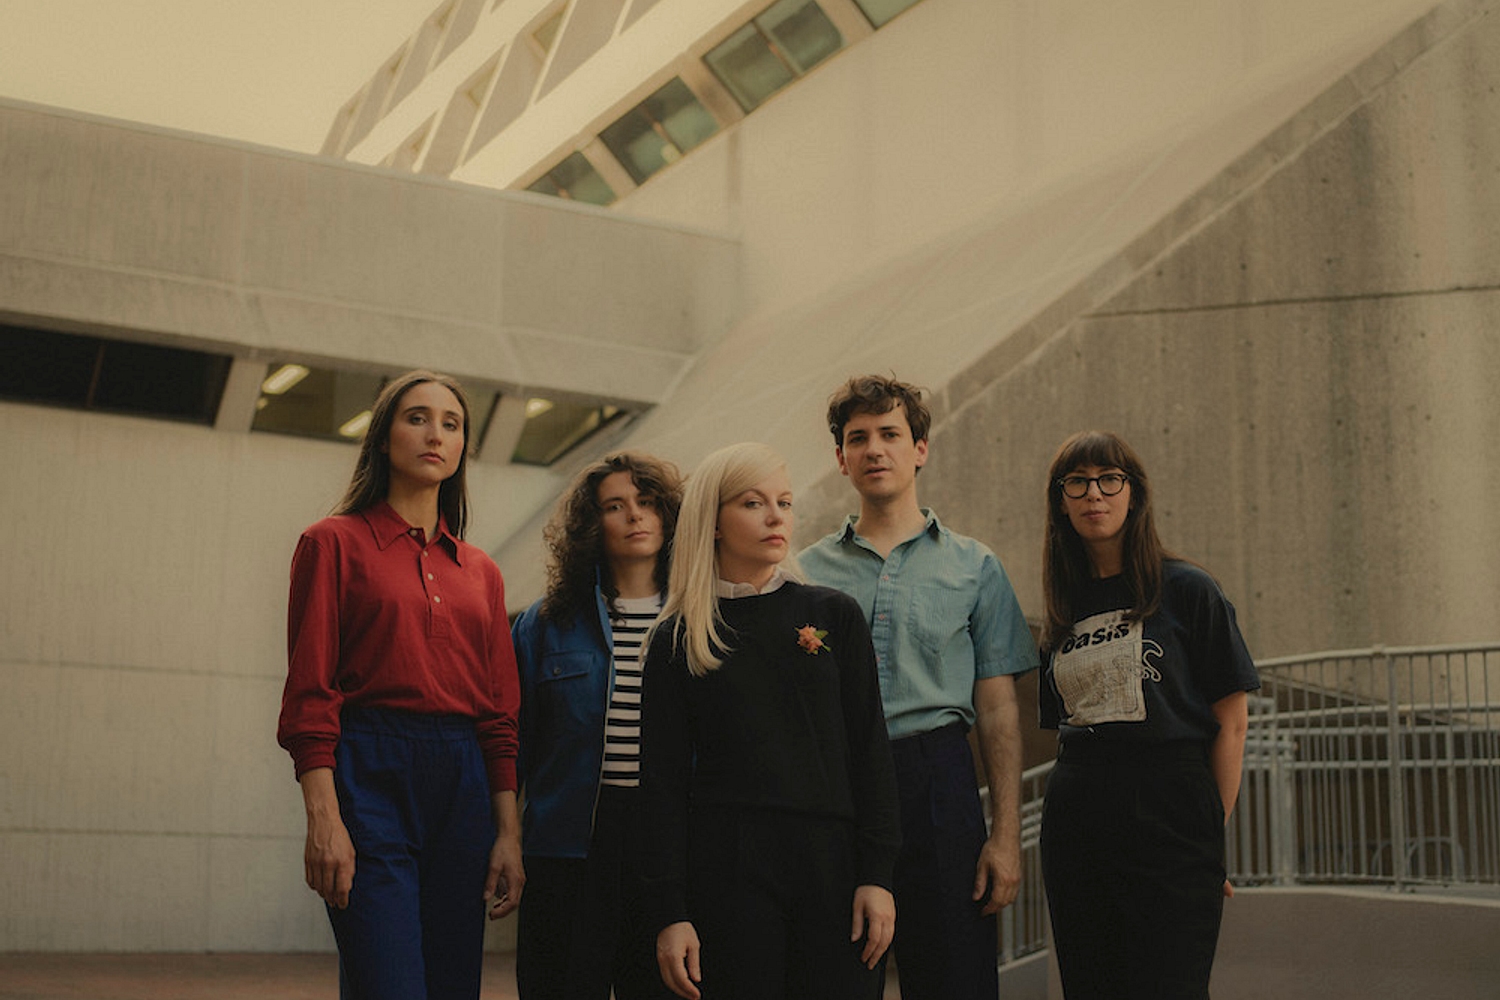 Alvvays are off on tour across the UK and Europe